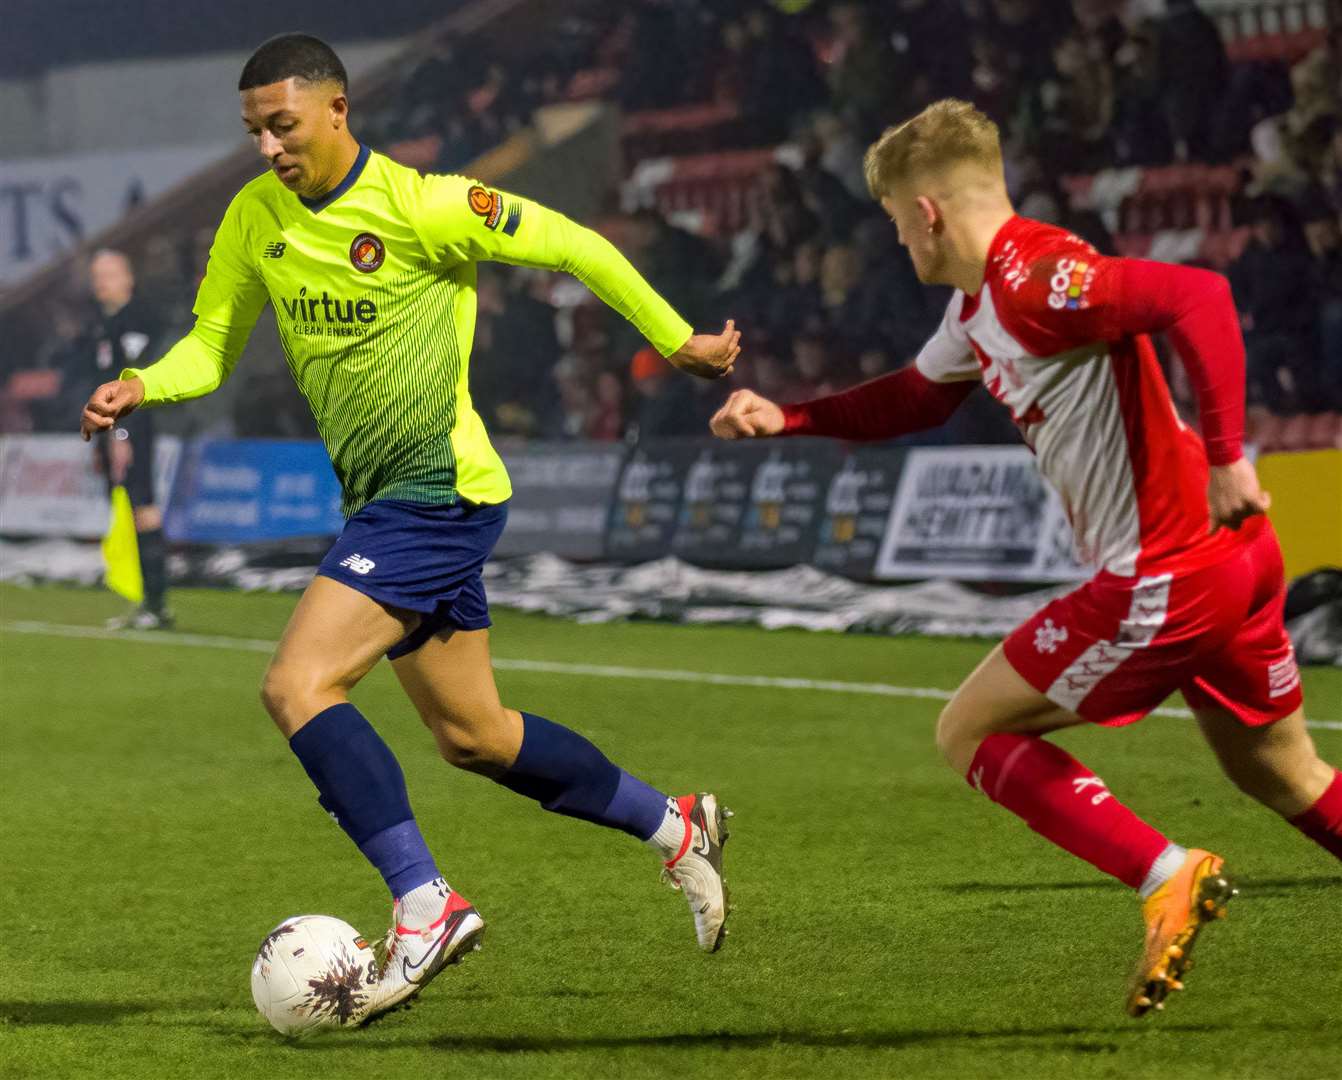 Boss Danny Searle says new father Myles Kenlock was at the forefront of Ebbsfleet’s team talk last week. Picture: Ed Miller/EUFC